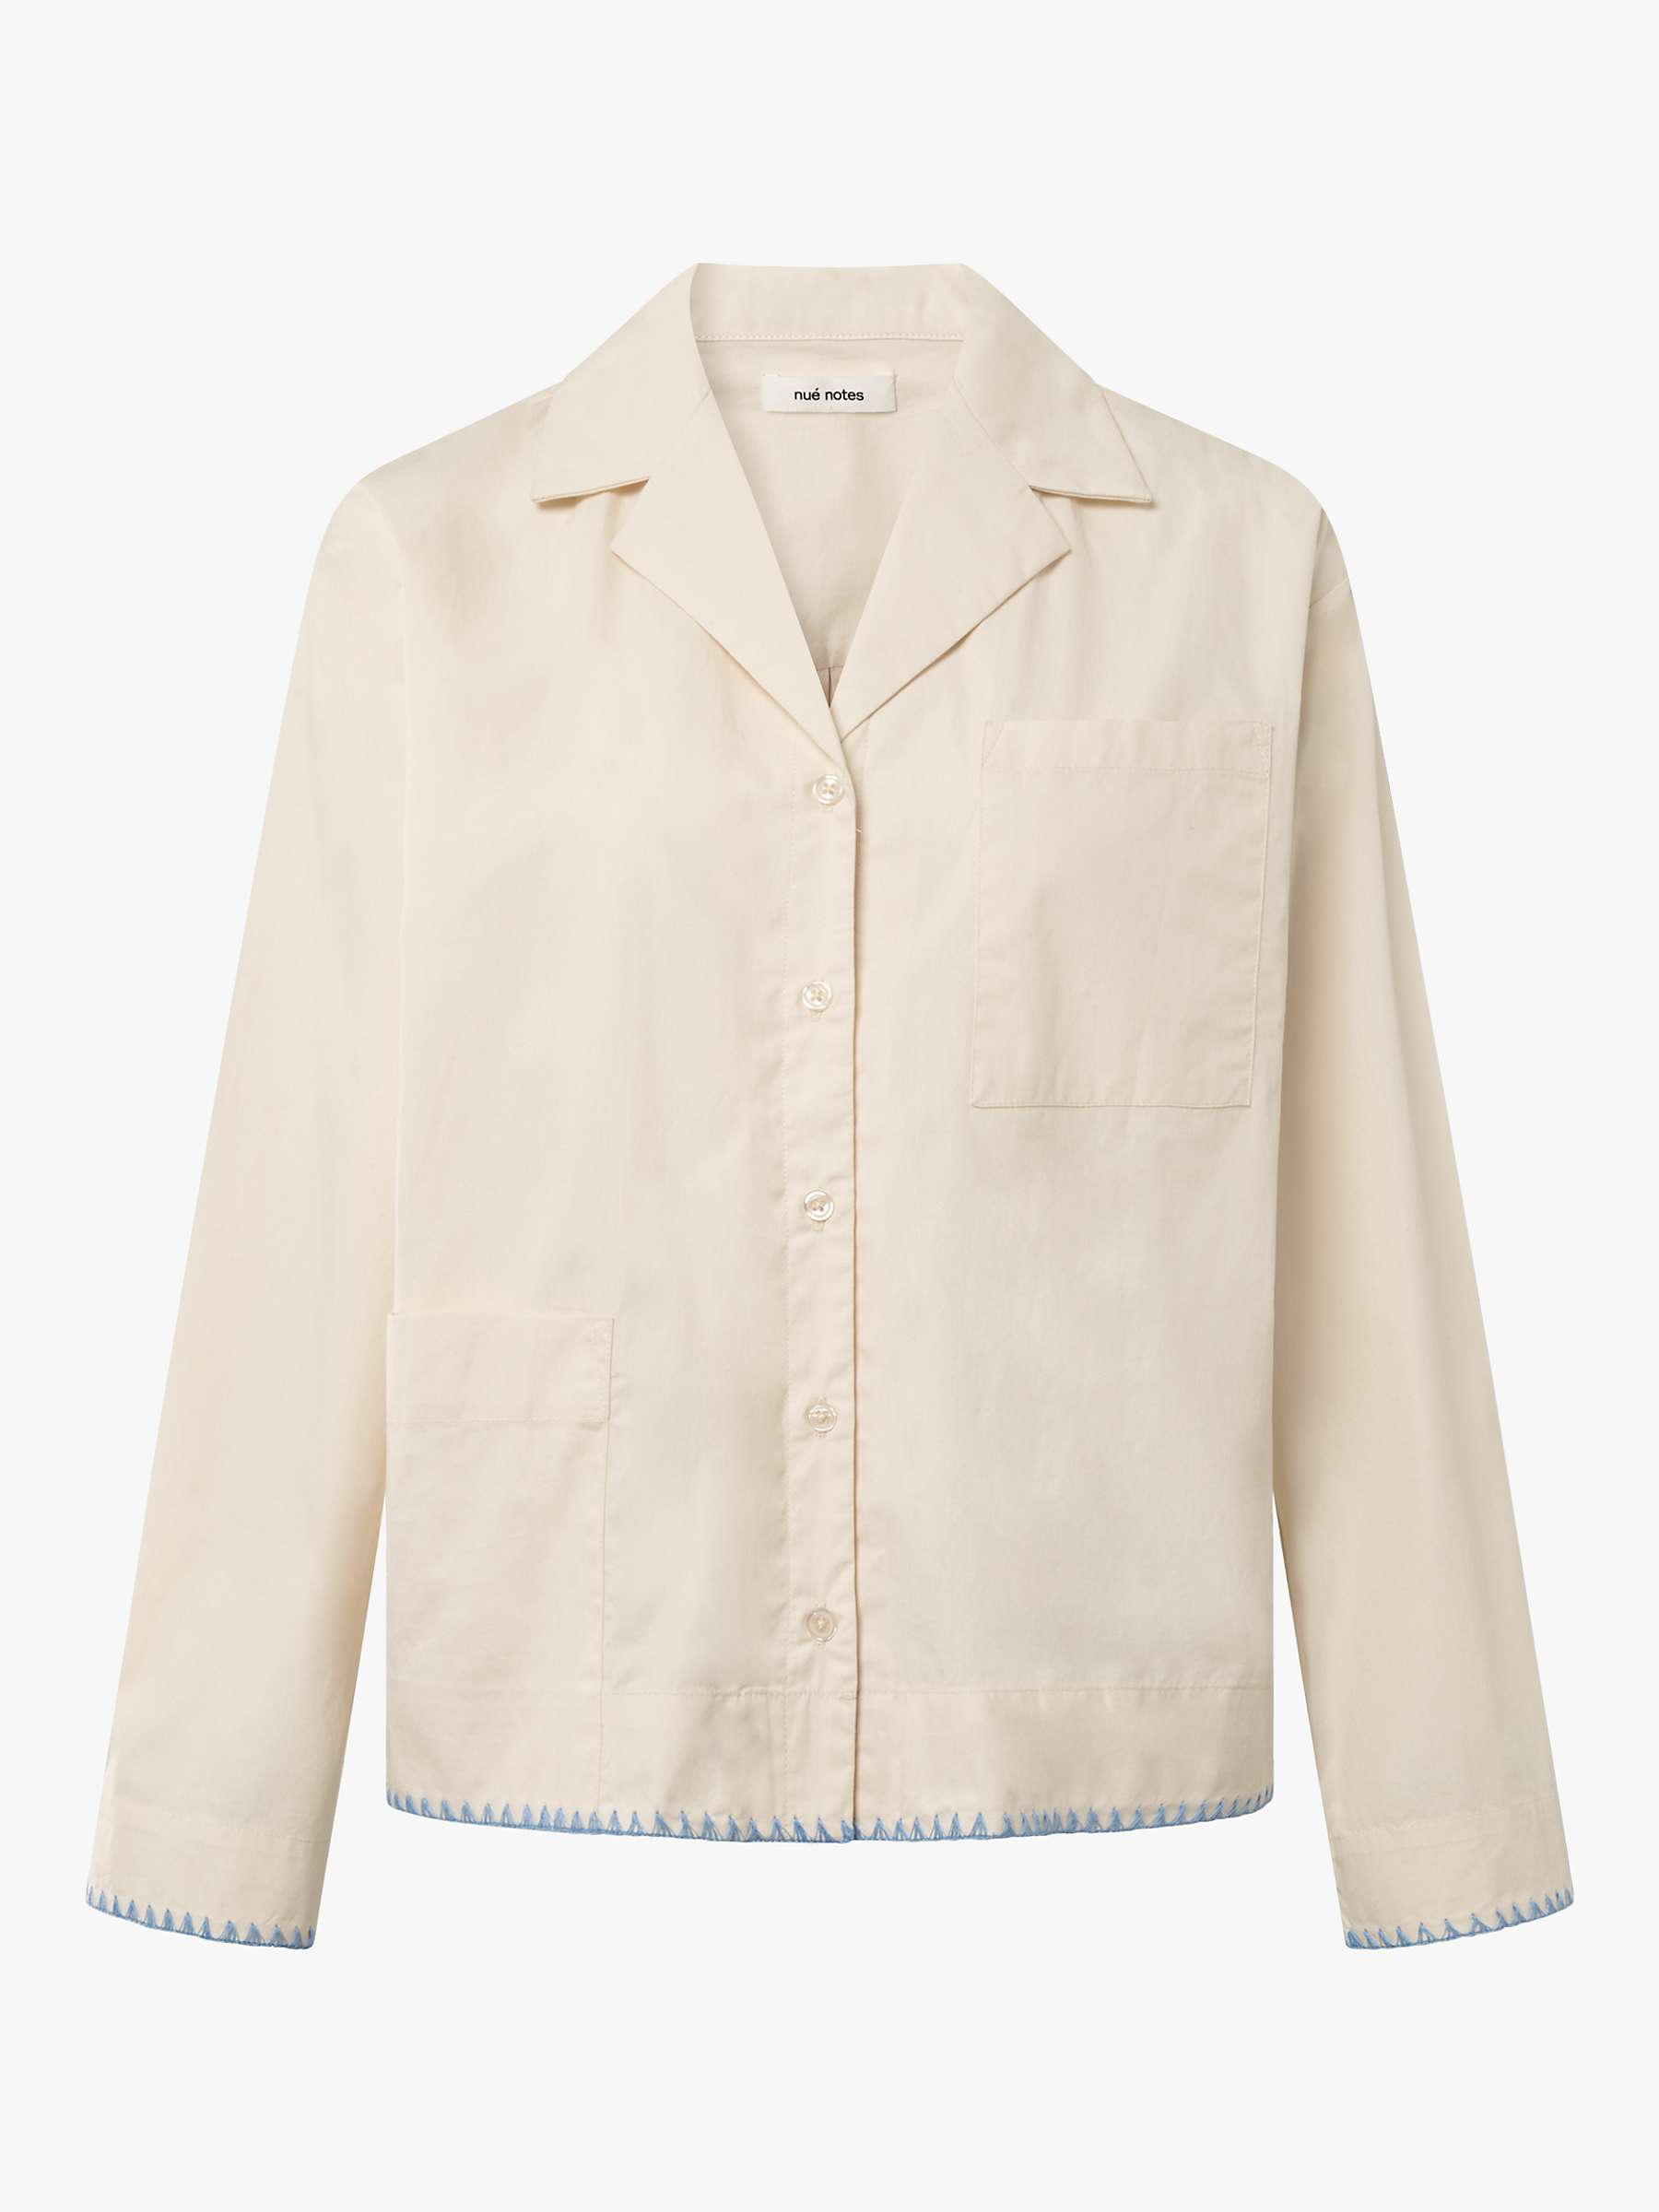 Buy nué notes Hardy Shirt, Birch Online at johnlewis.com